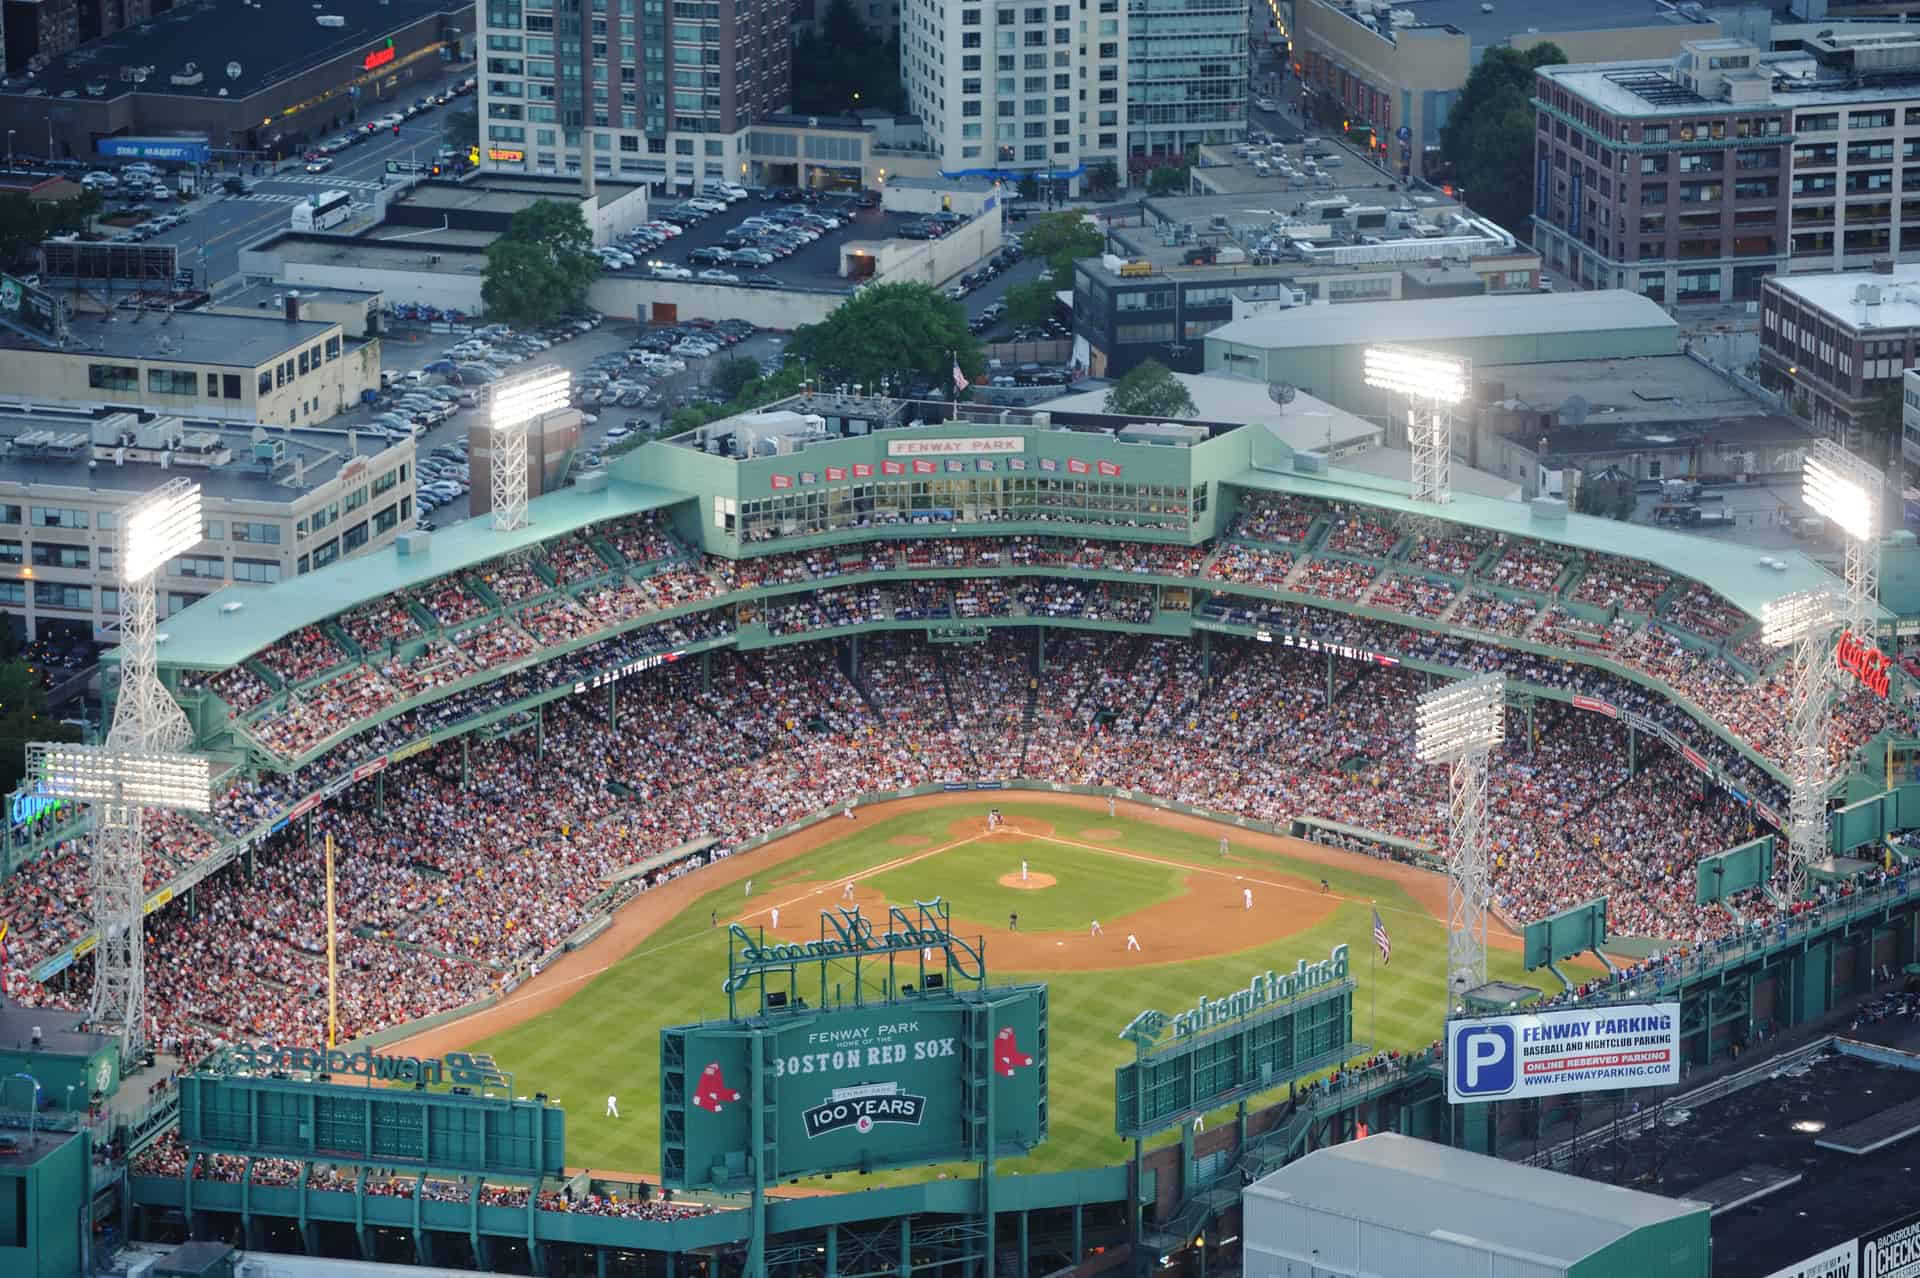 What’s New at Fenway Park? HighProfile Monthly